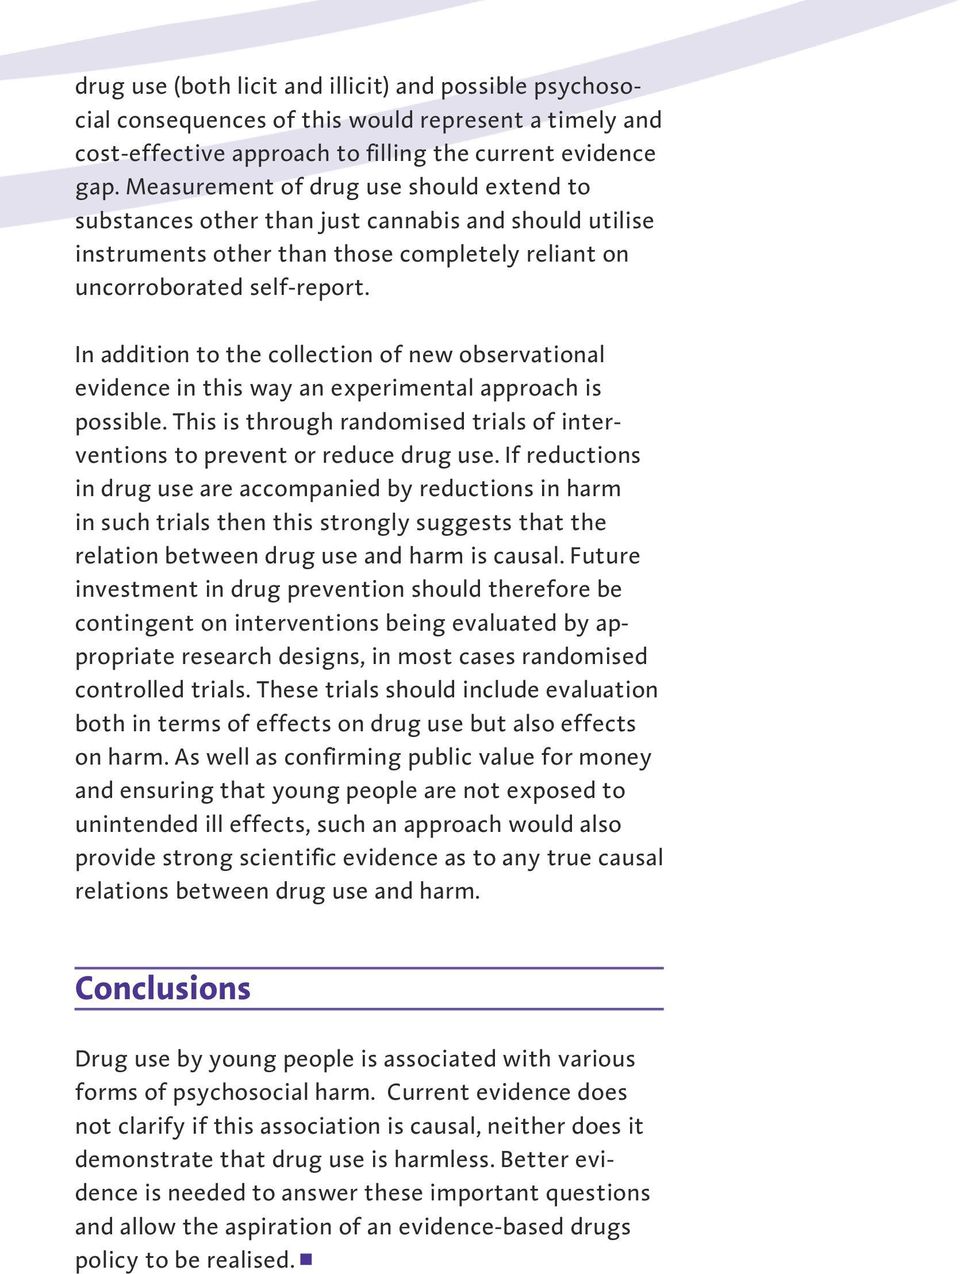 In addition to the collection of new observational evidence in this way an experimental approach is possible. This is through randomised trials of interventions to prevent or reduce drug use.